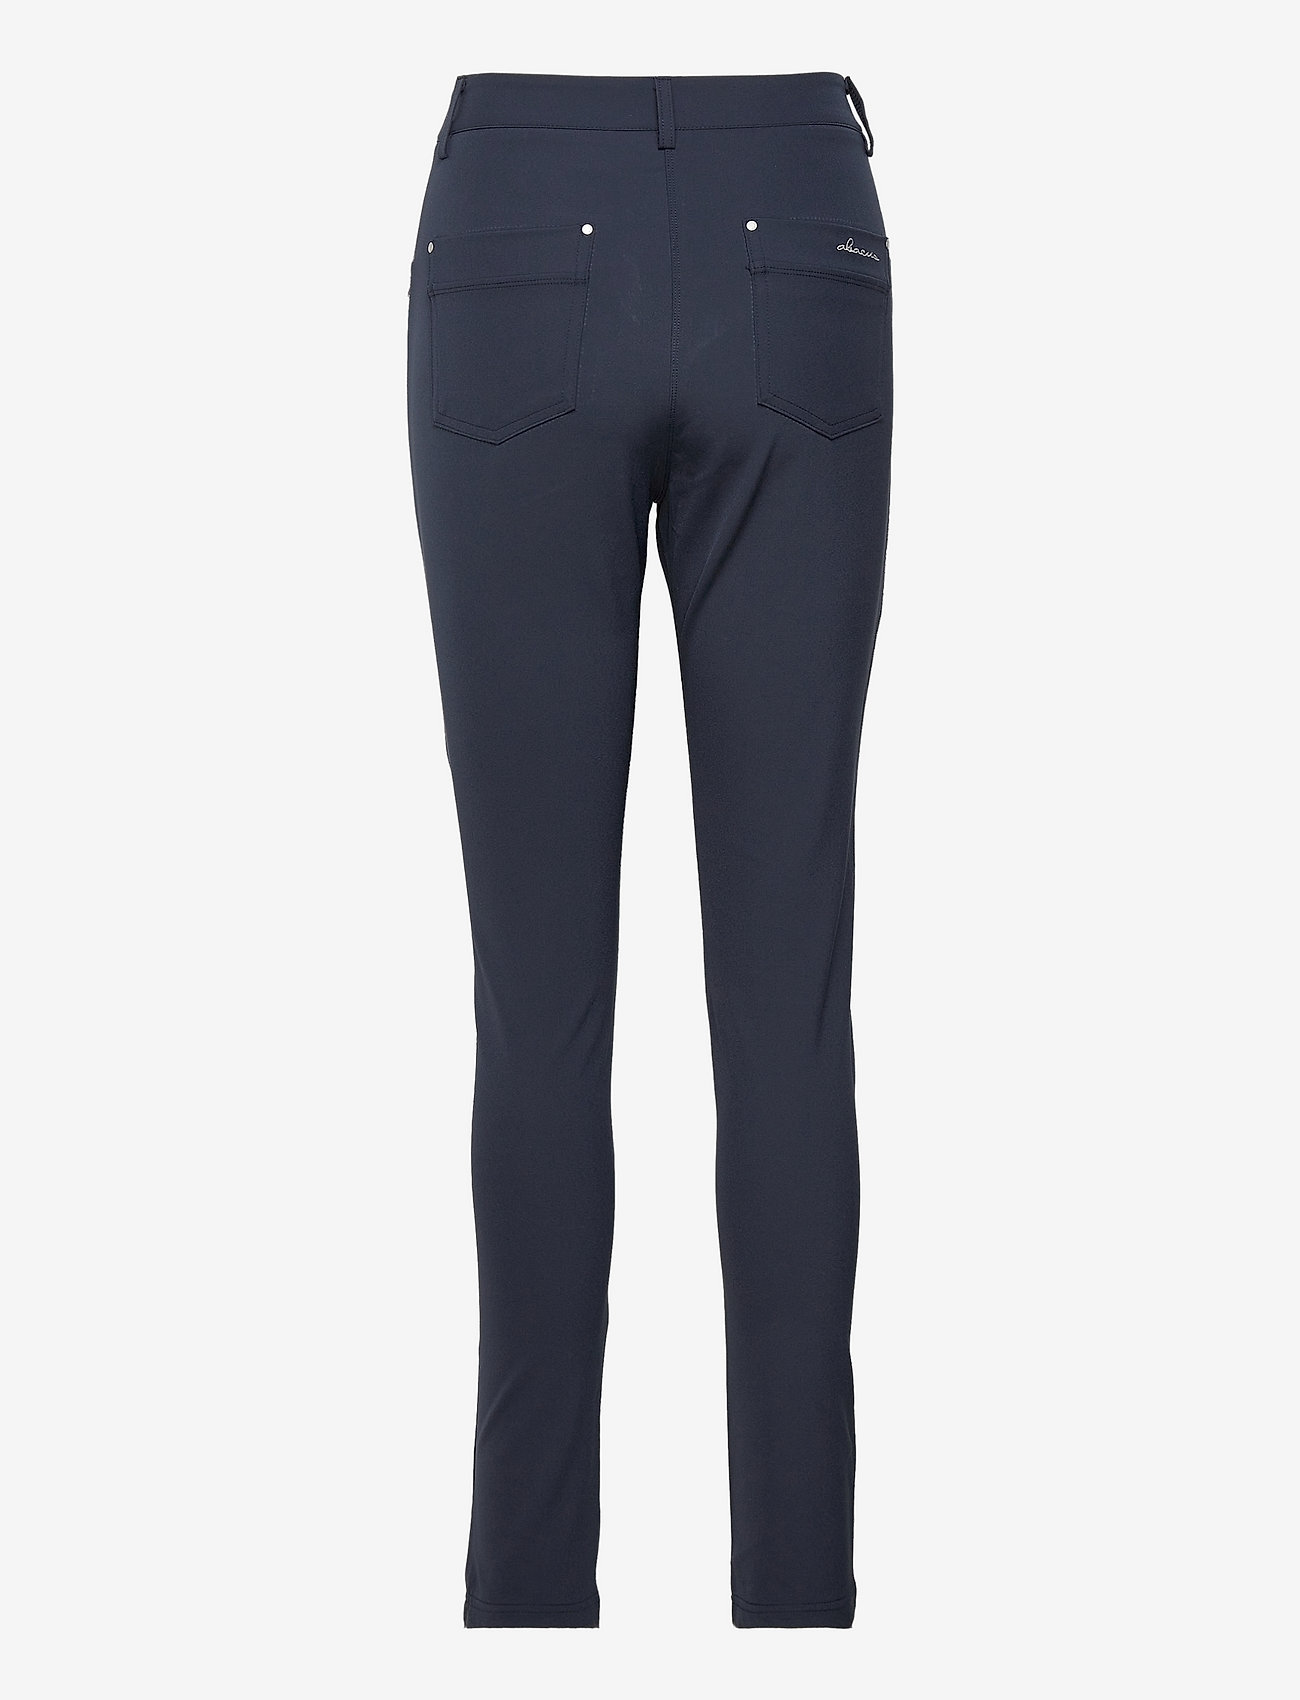 Abacus - Lds Elite trousers - golfbukser - navy - 1